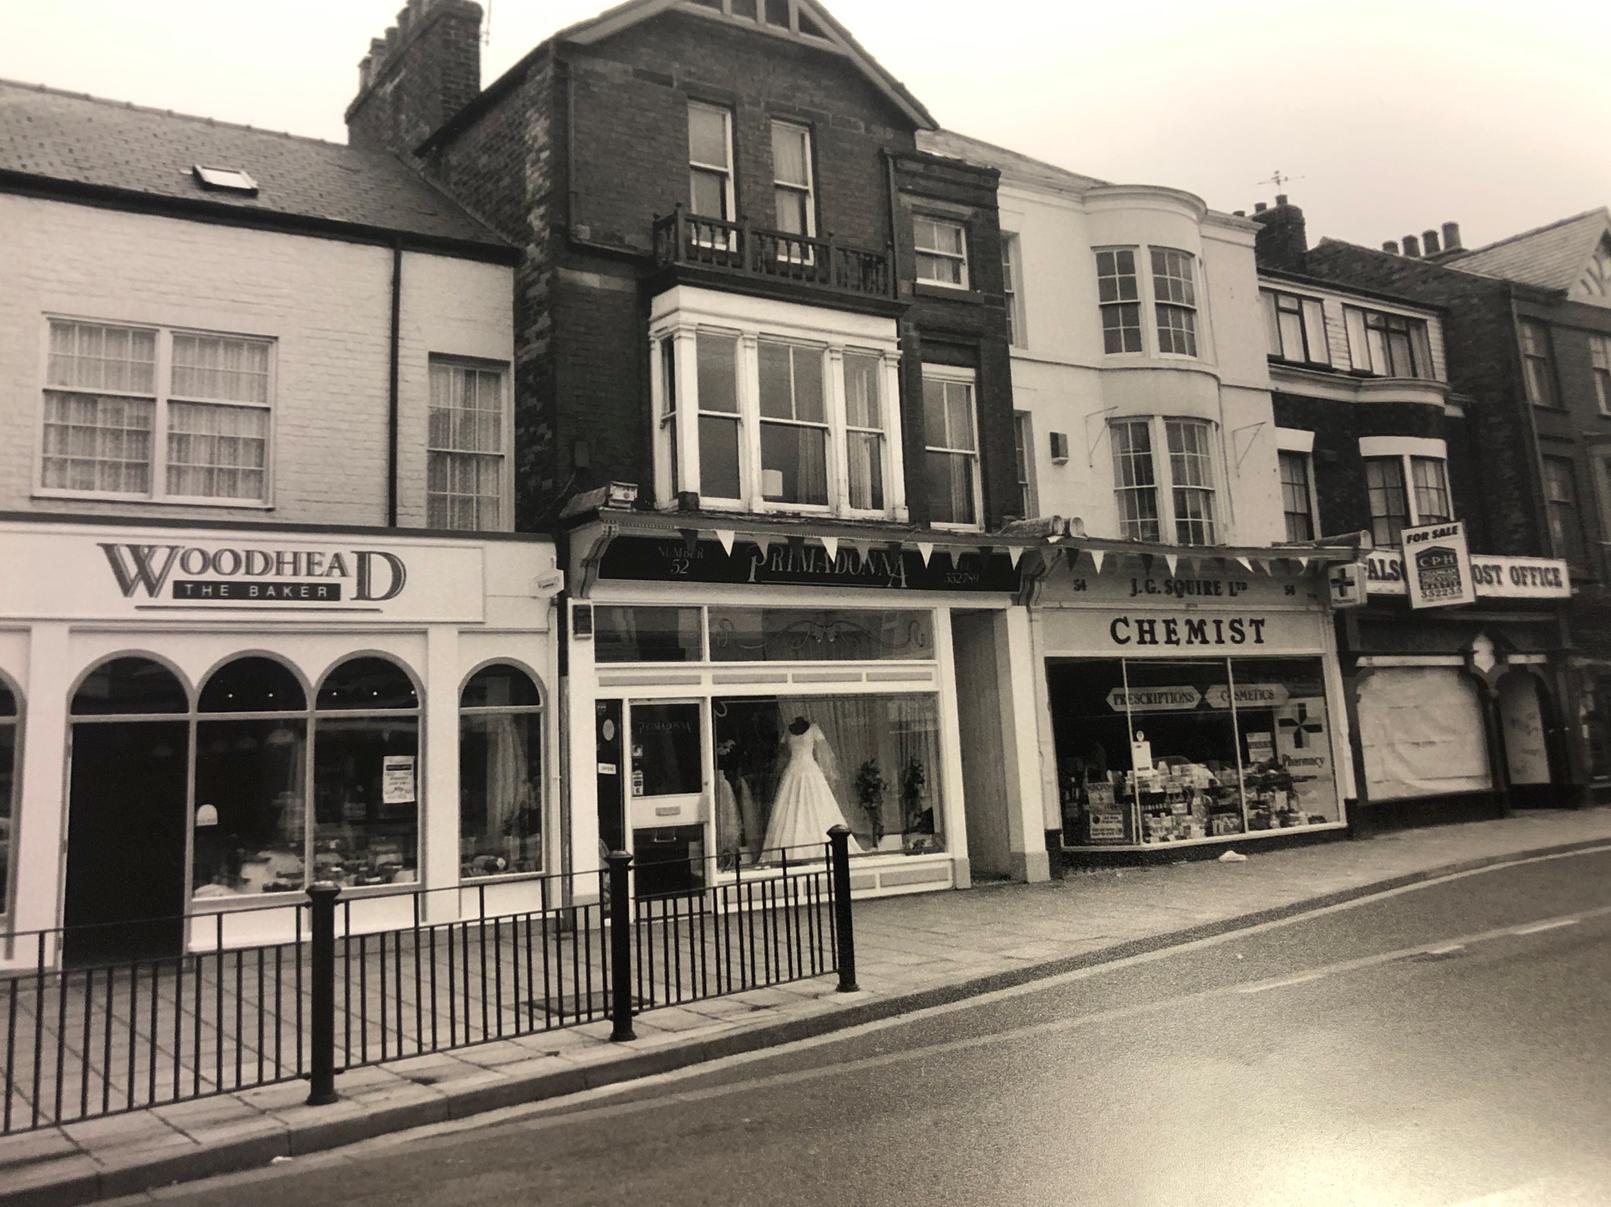 Of all the shops in this picture from 1995, only one remains today - J. G. Squire Chemist. Bakery chain Woodhead is now Falsgrave Funeral Service and wedding shop Primadonna is Aim High Online Ltd.